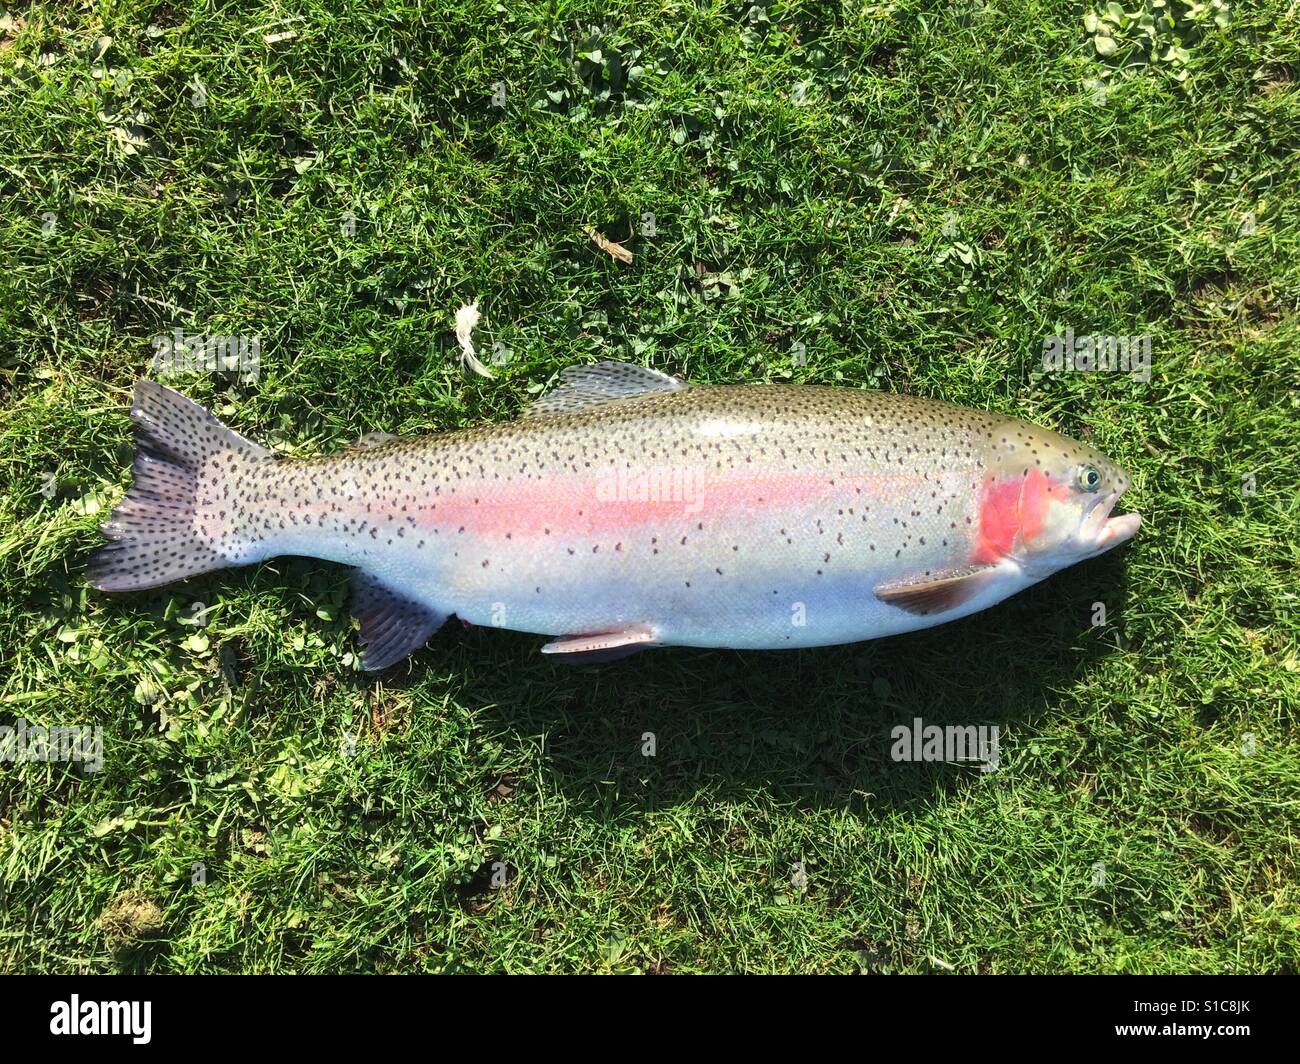 Large freshly caught rainbow trout fish 2.41kg or 5lb 5oz Stock Photo